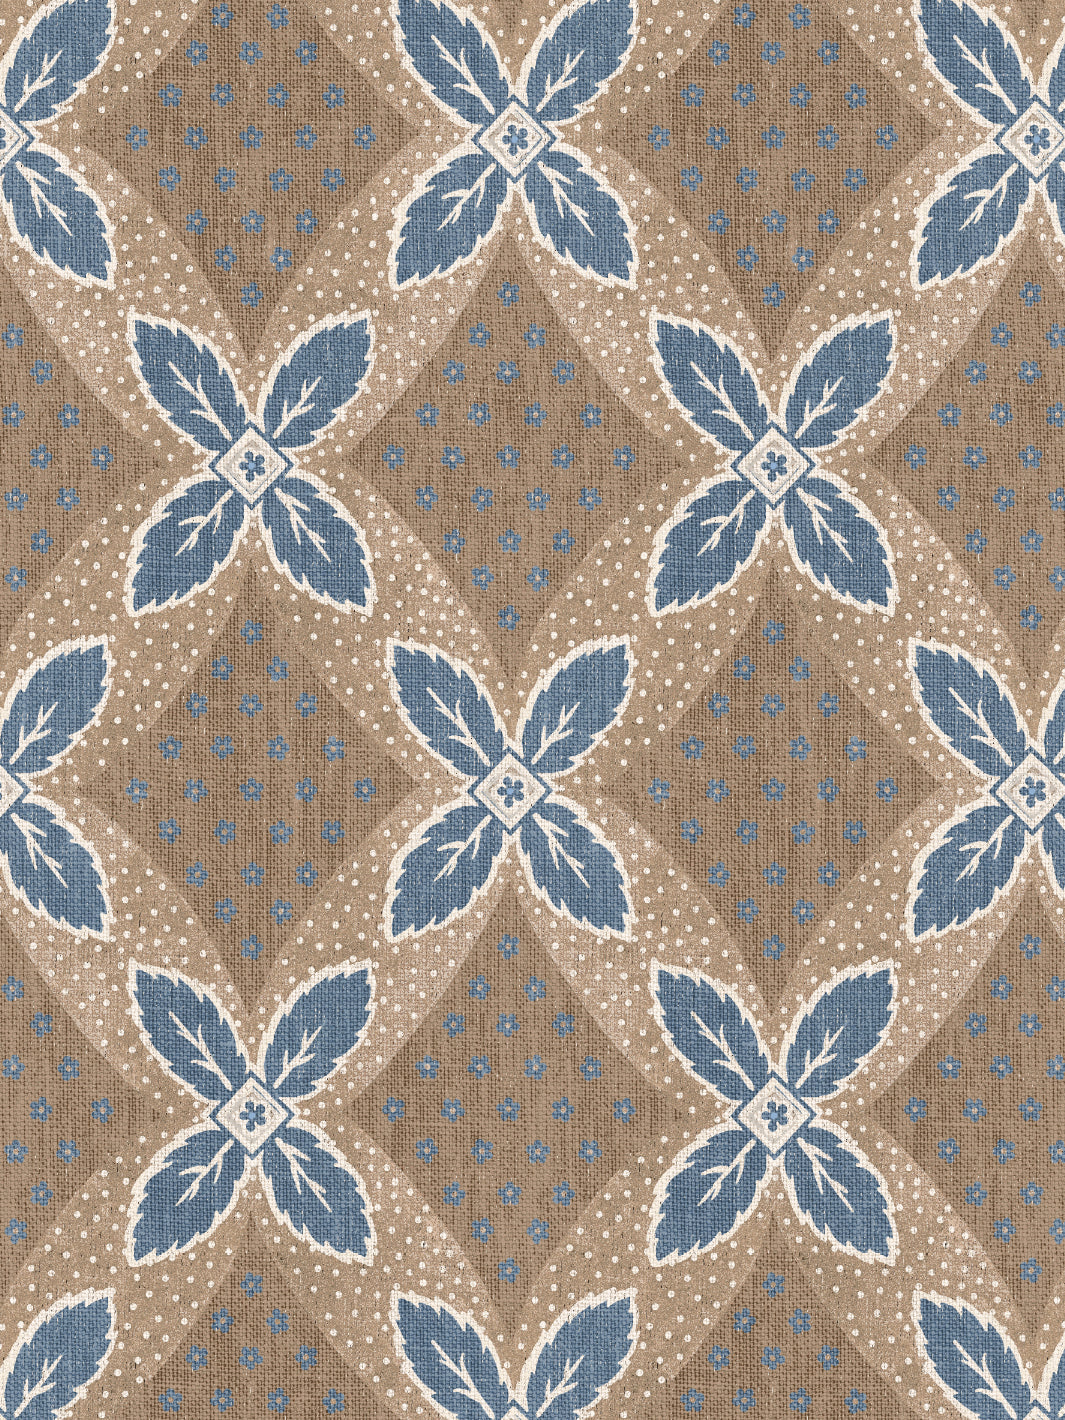 'Arthur' Wallpaper by Nathan Turner - Blue on Brown